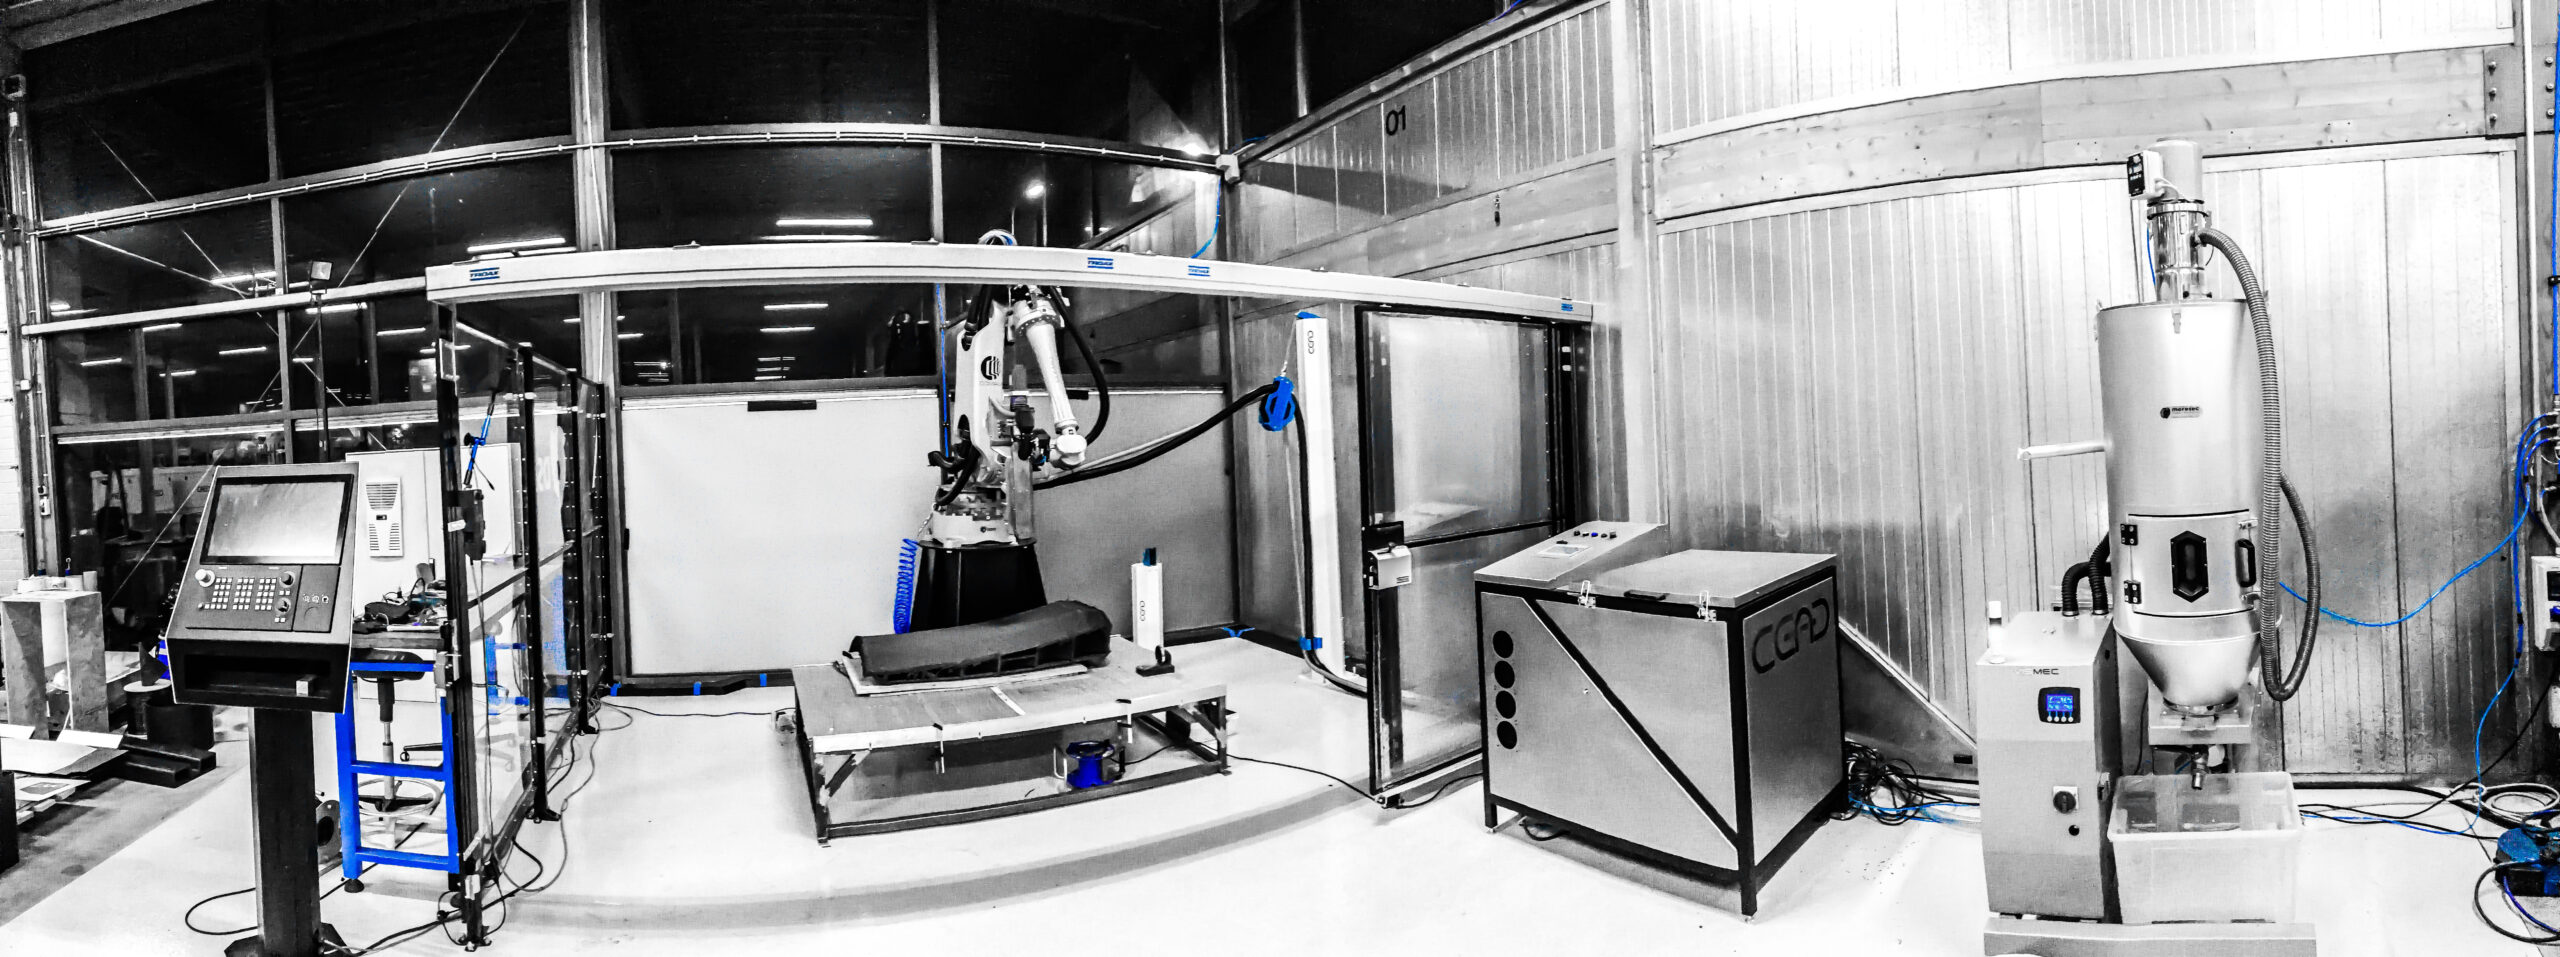 Large format industrial additive manufacturing machine